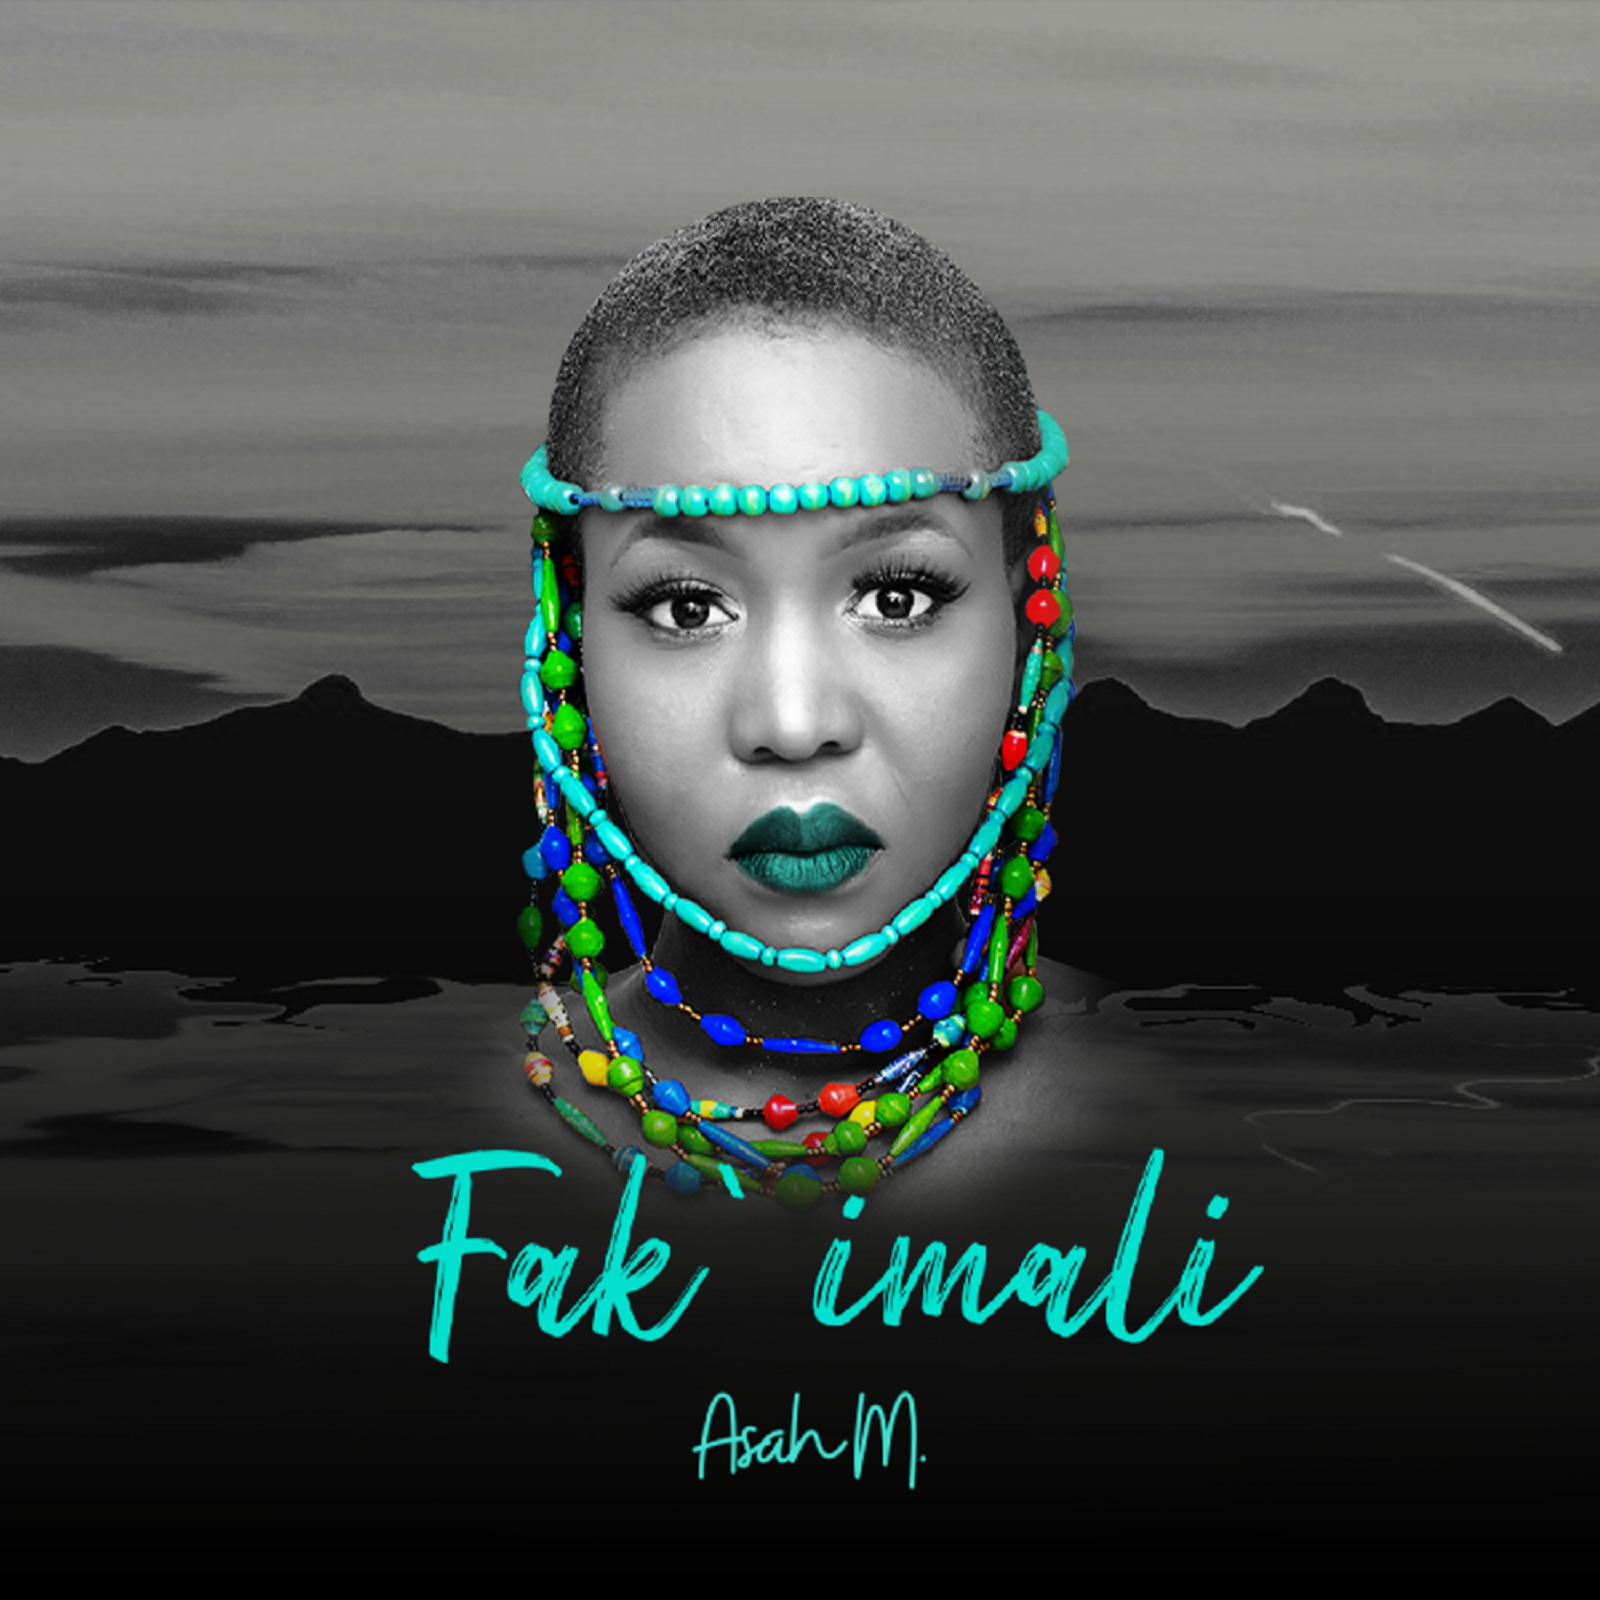 AFRO POP SENSATION – Asah M – Releases an Ethereal and intoxicating song Fak ‘Imali – A song dedicated to women. “One of Our Top New Afro Pop Songs on Bafana FM”